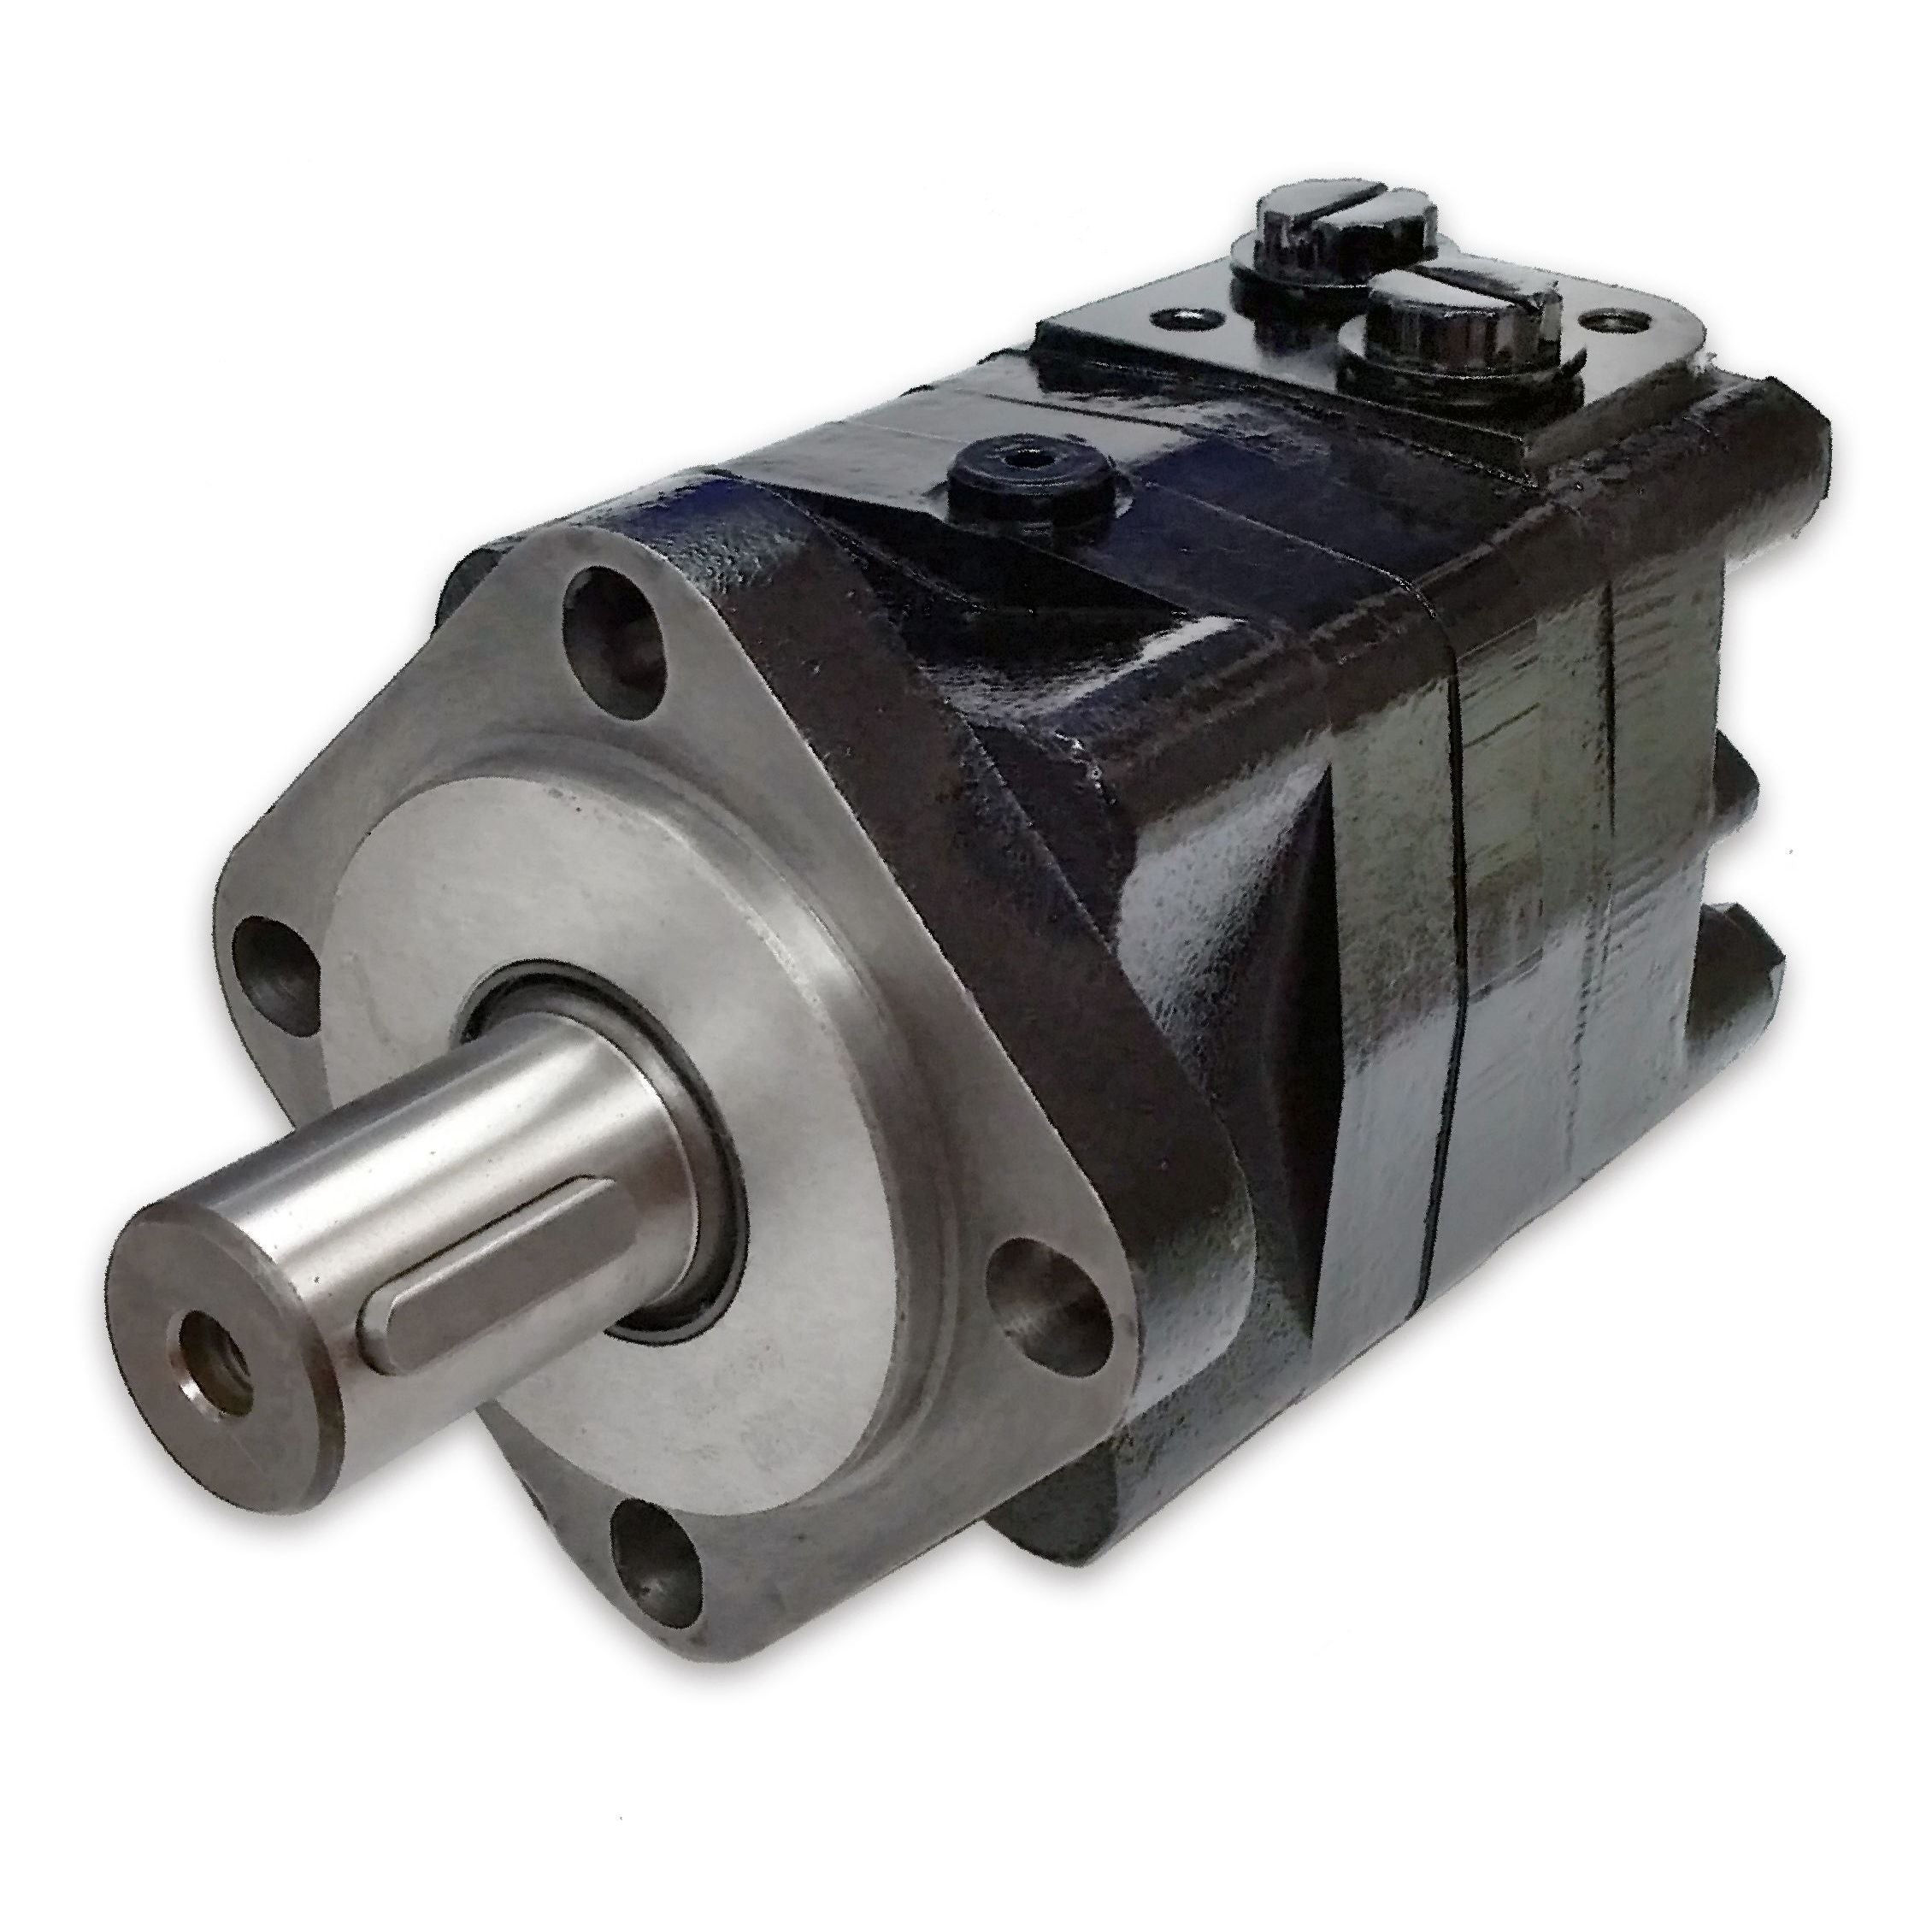 BMSY-400-E4-G-S : Dynamic LSHT Motor, 394cc, 185RPM, 7786in-lb, 2320psi Differential, 19.81GPM, SAE A 4-Bolt Mount, 1.25" Bore x 5/16" Key Shaft, Side Ported, #10 SAE (5/8")